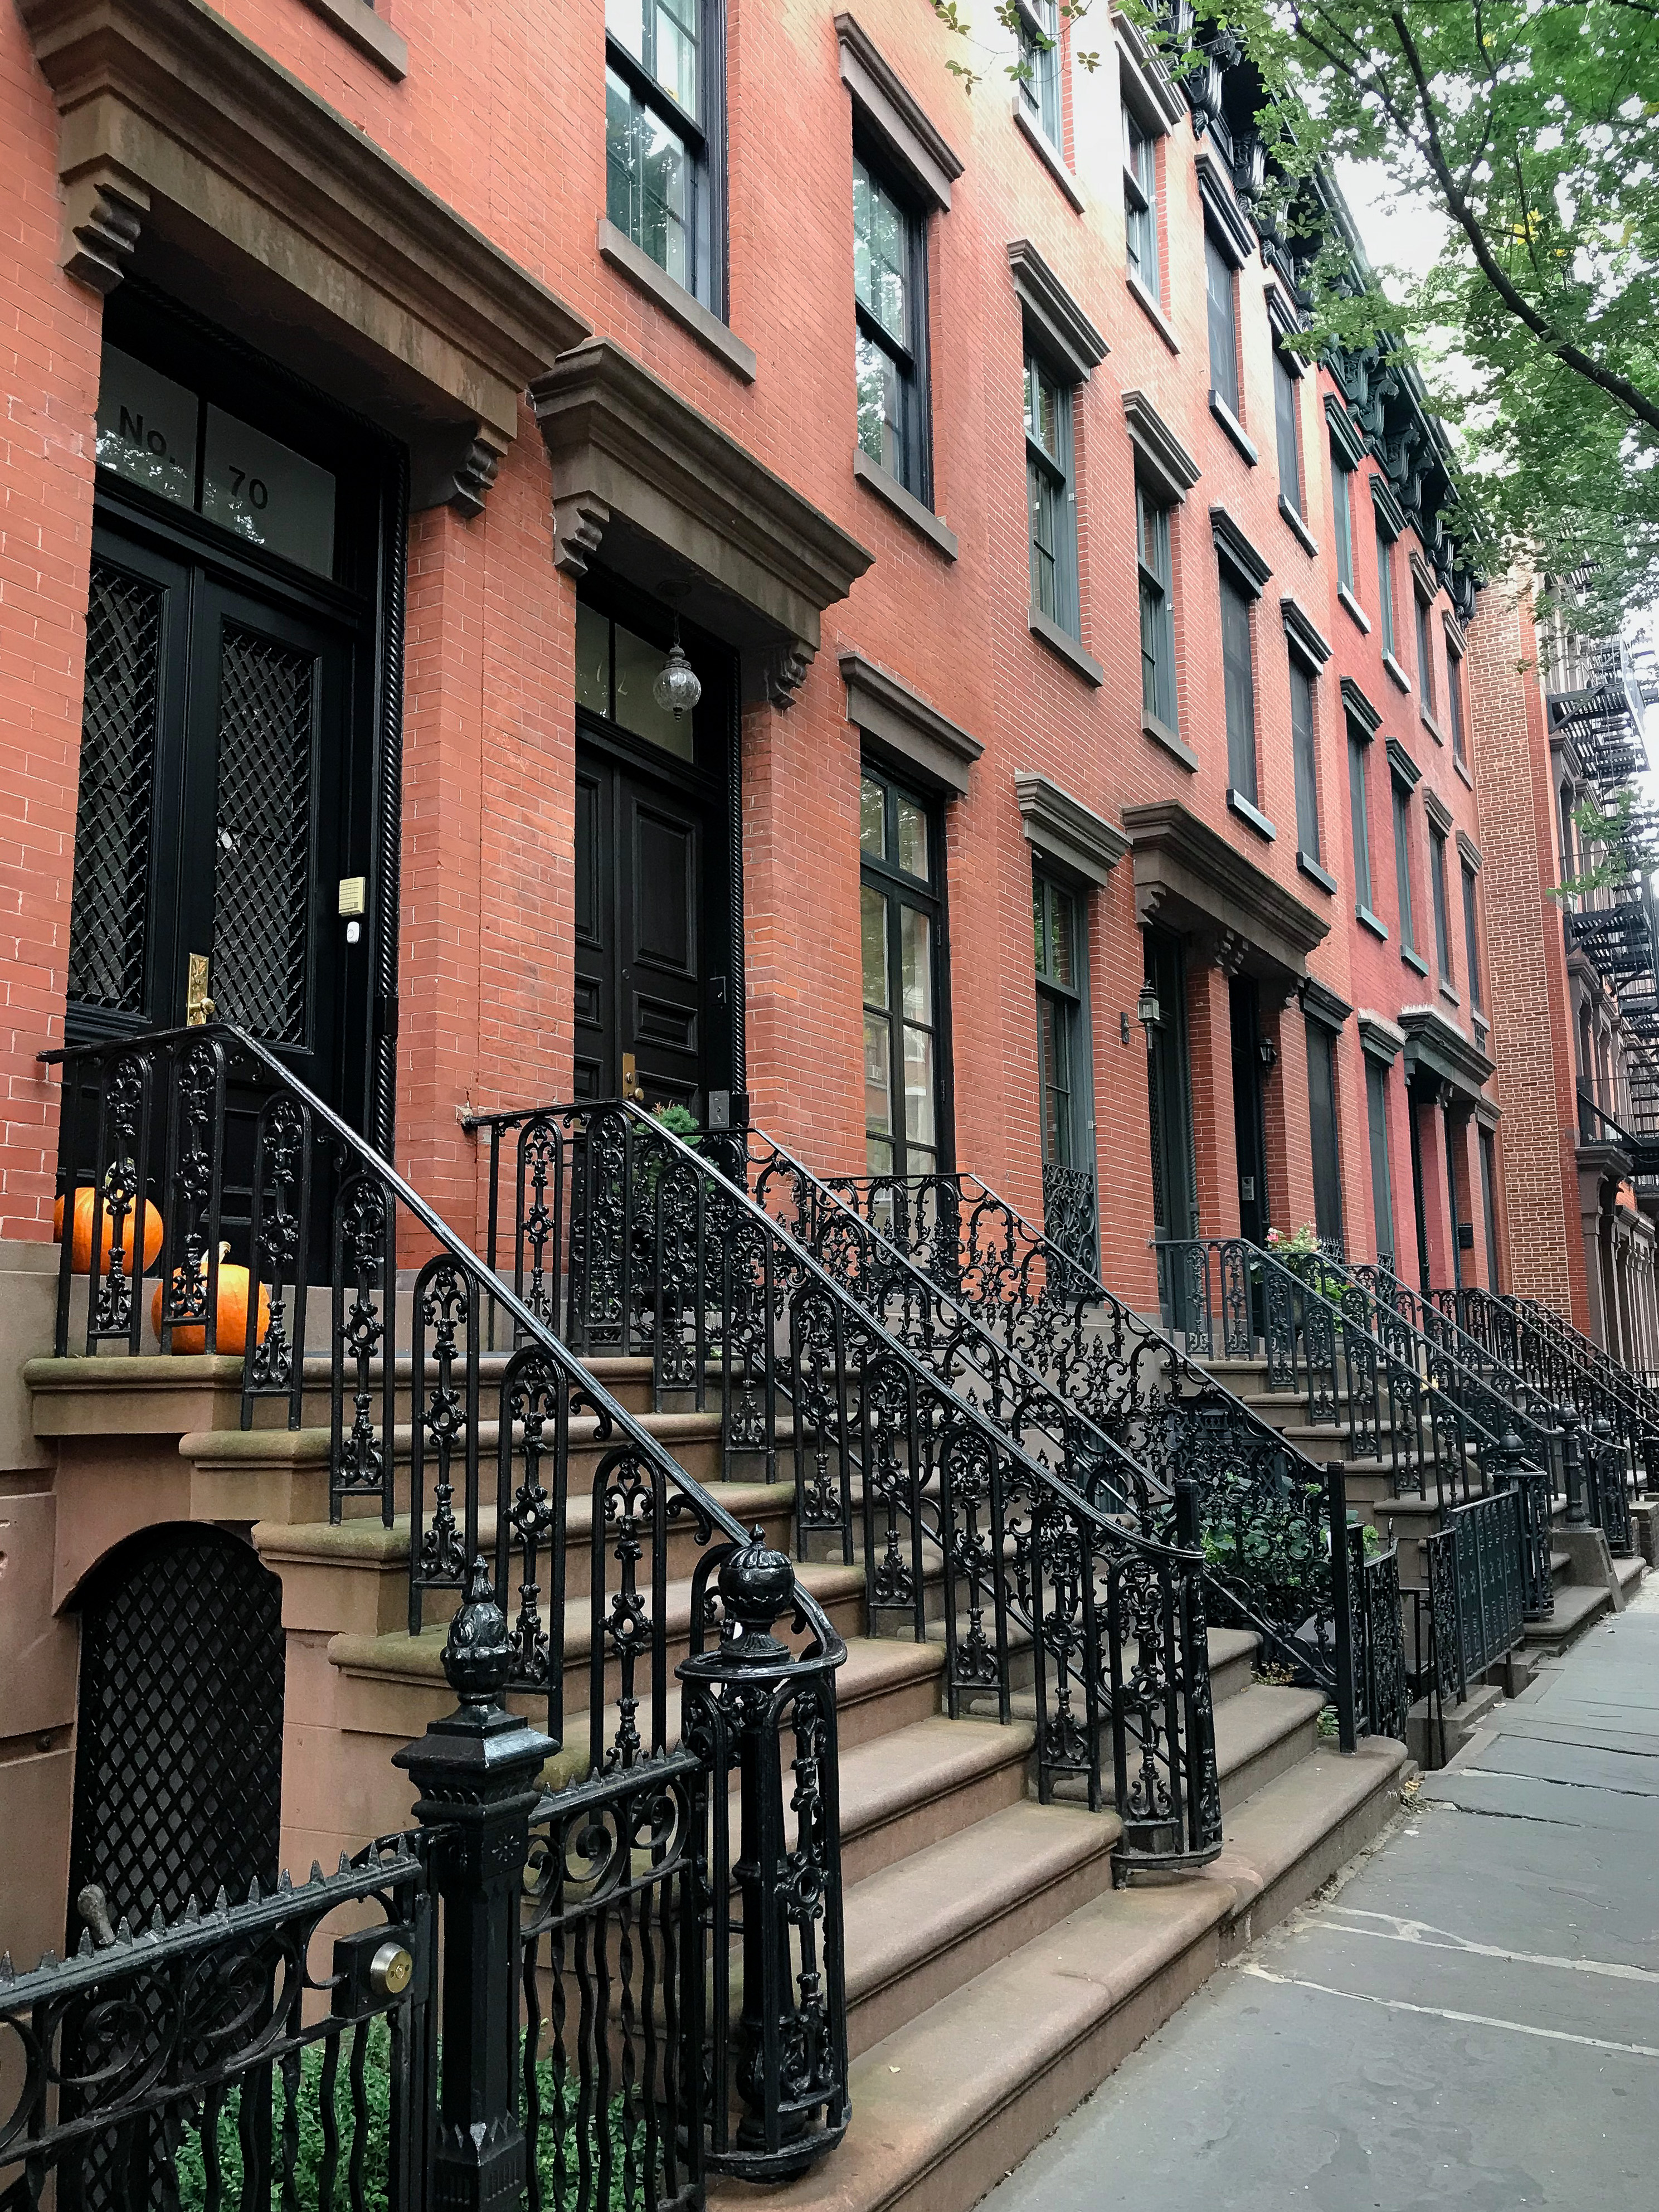 If you're looking for a more "local" feel for New York City, you should 100% check out the West Village! All the local vibes with cheaper accommodation and so much fun! | Teaspoon of Nose